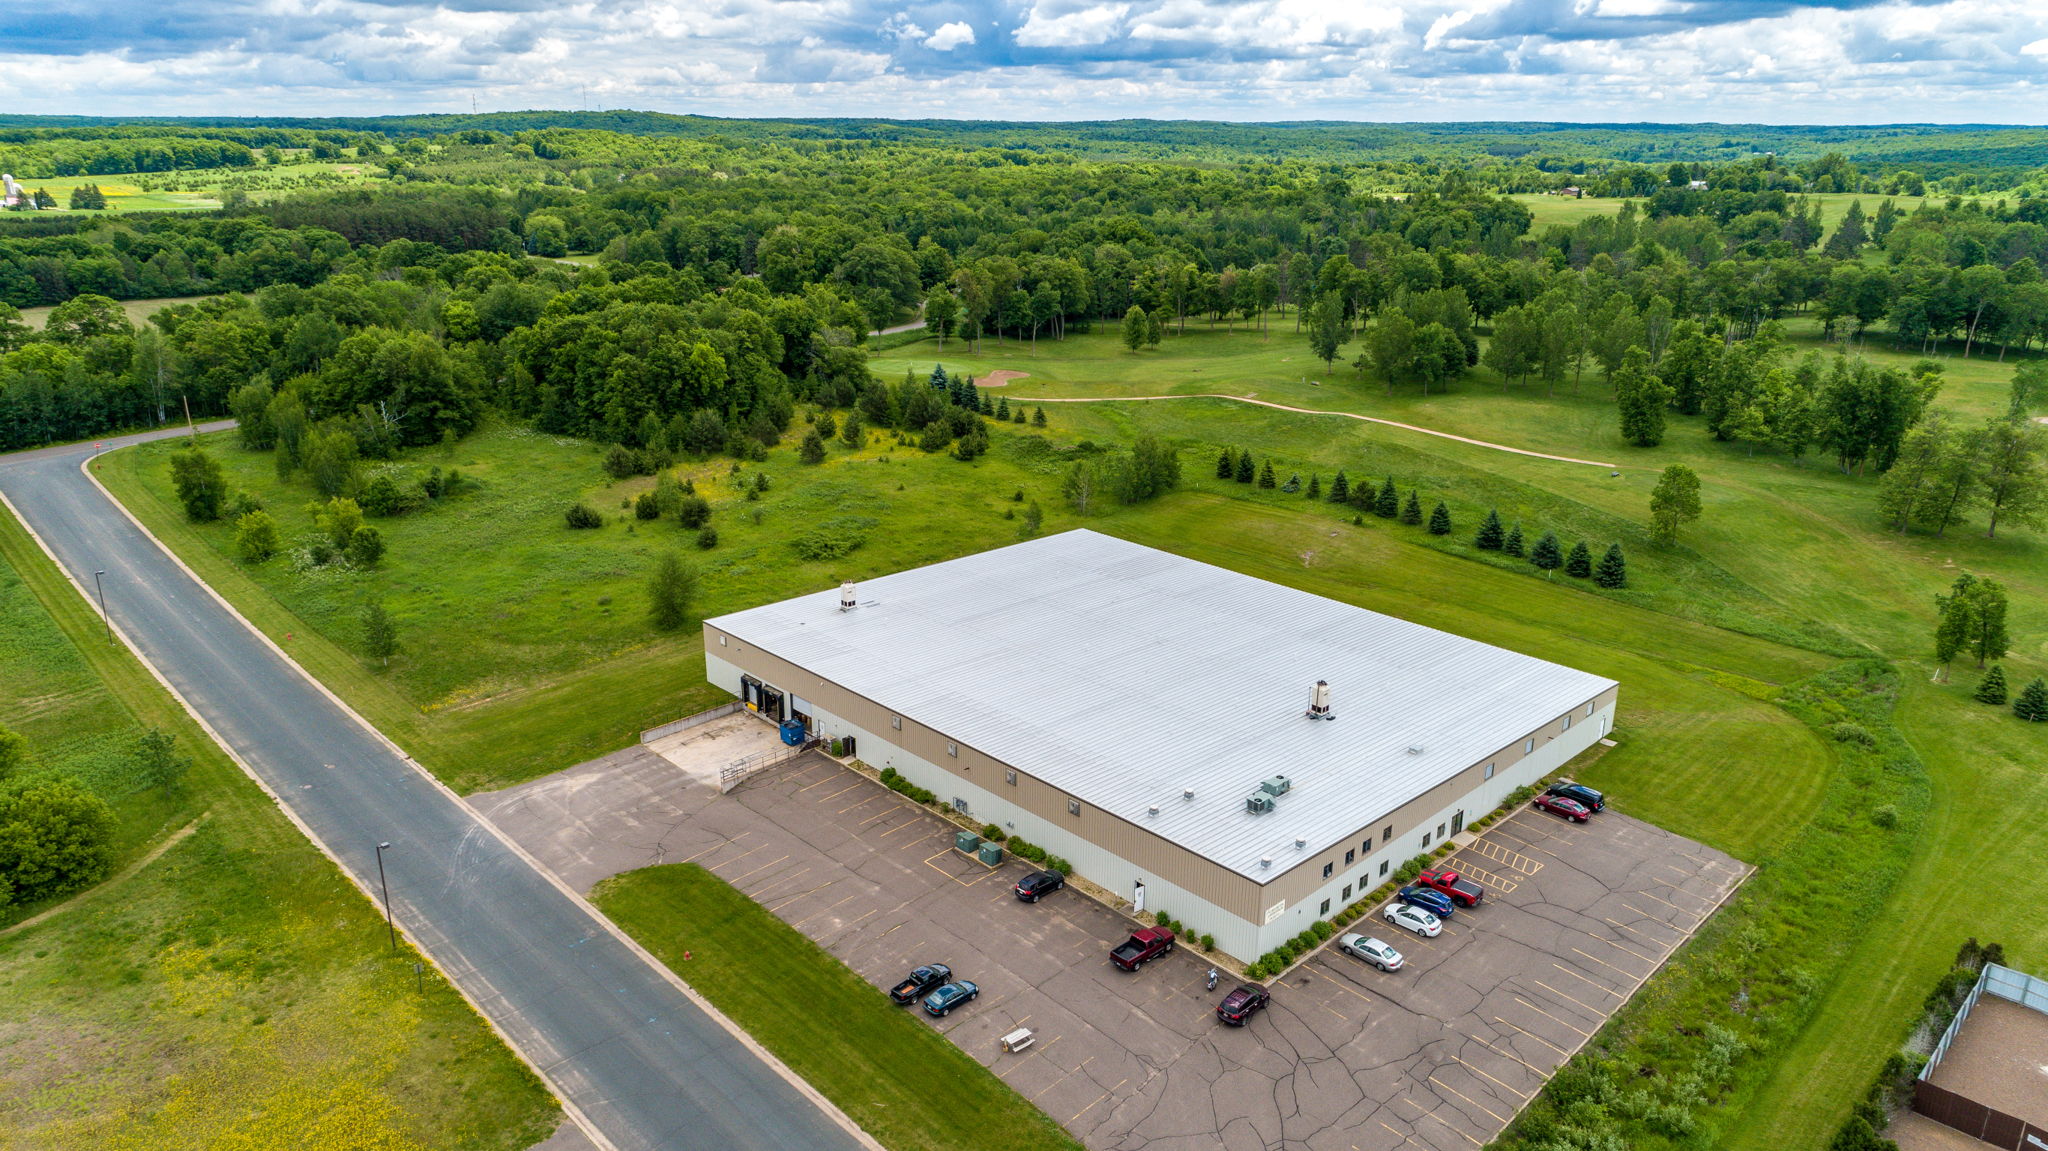  214 Industrial Way East, Frederic, WI 54837, US